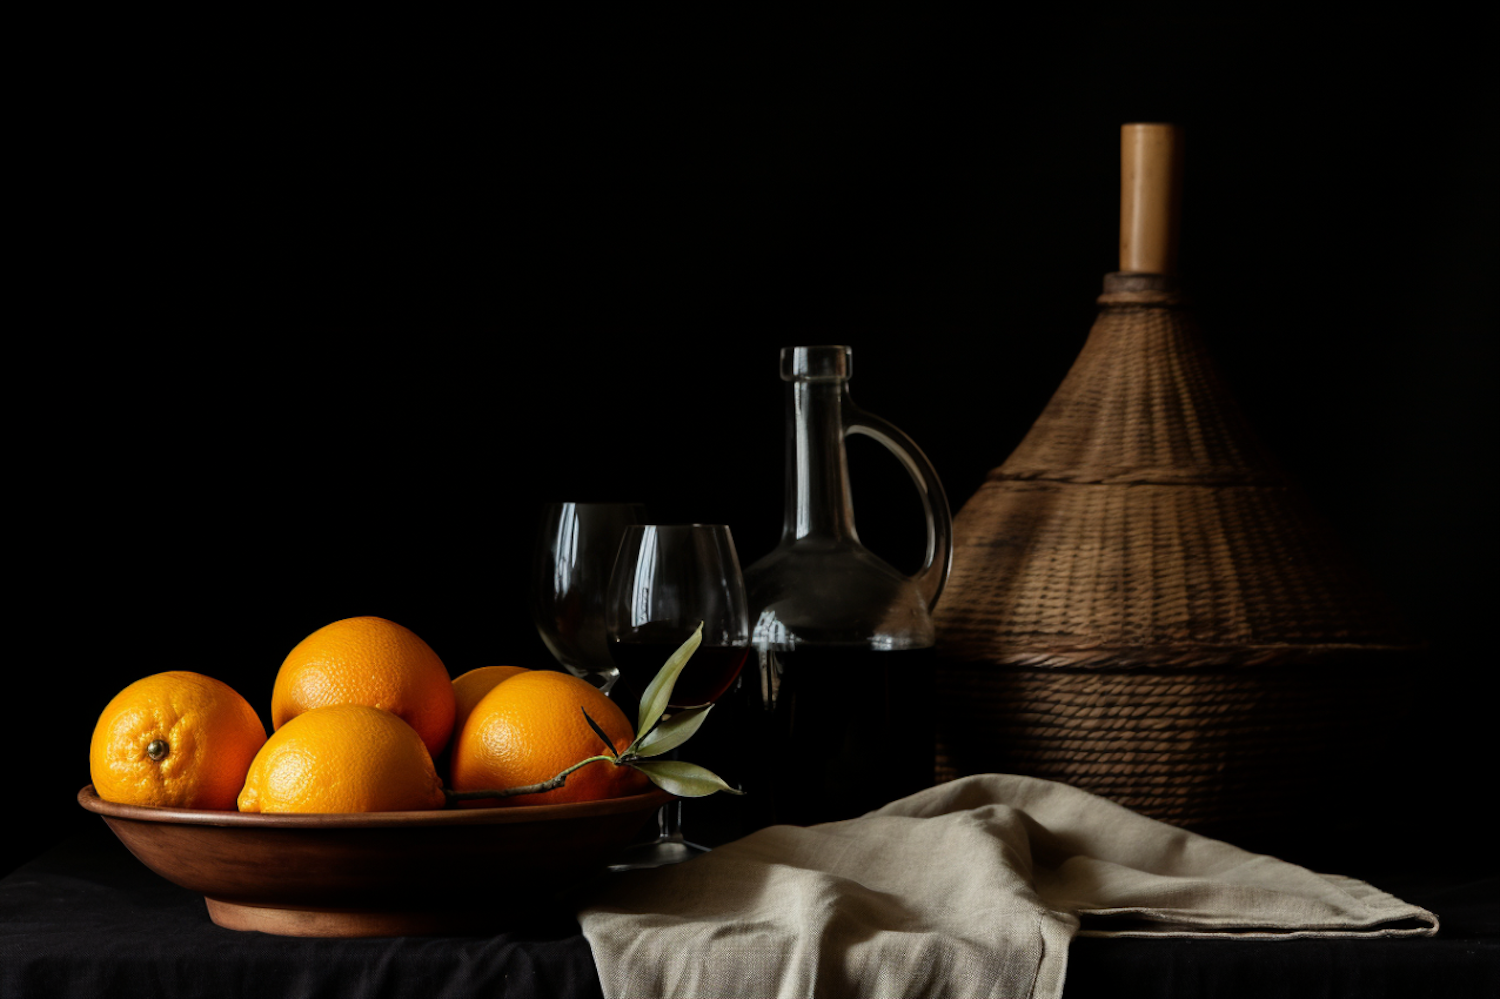 Classic Still Life with Oranges and Wine